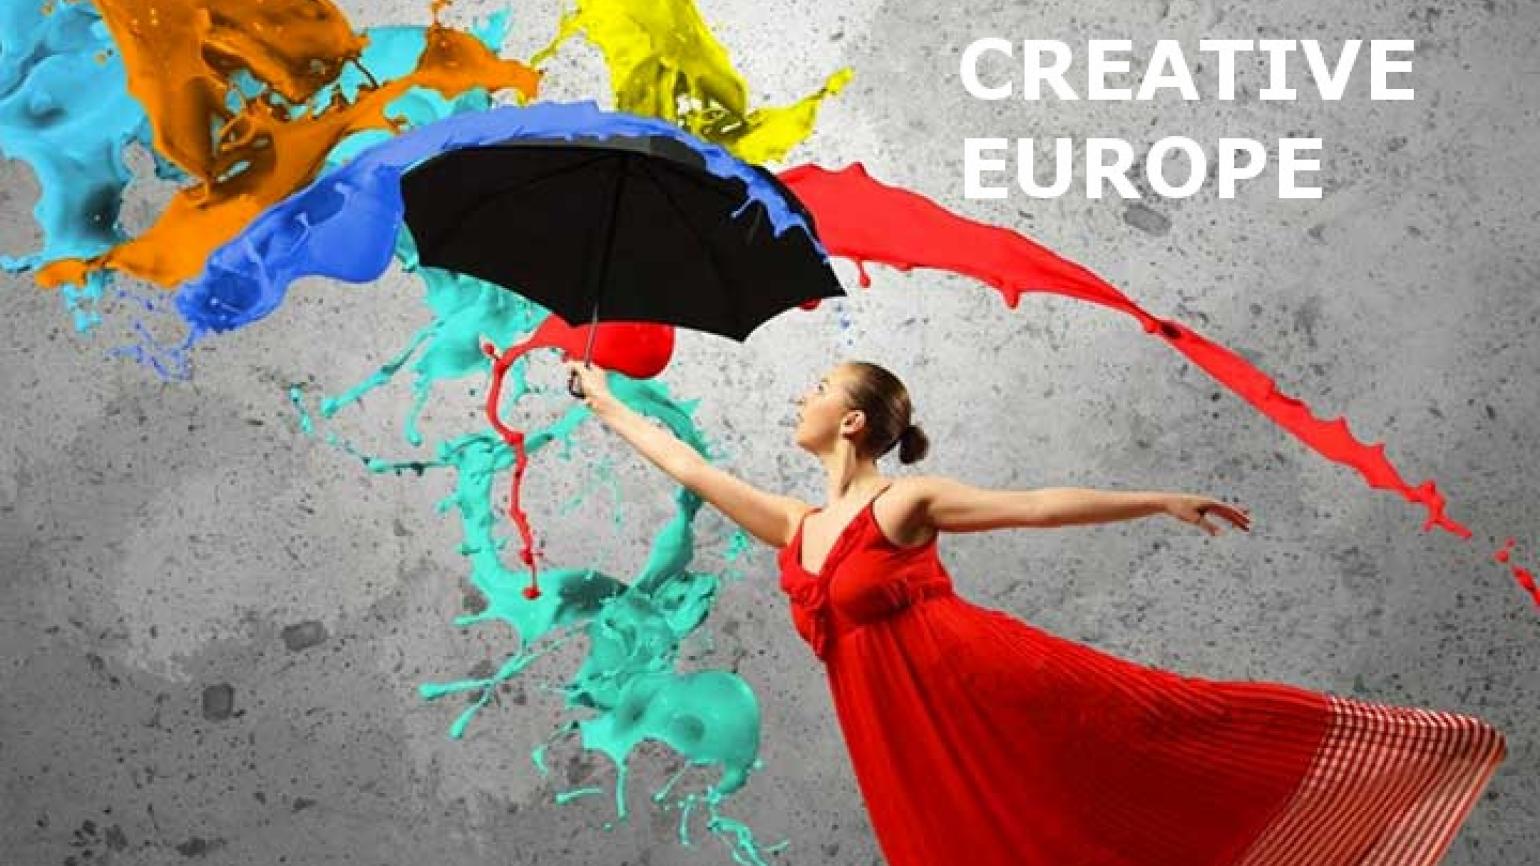 Creative Europe - Media Secondary Program: Open for new entries